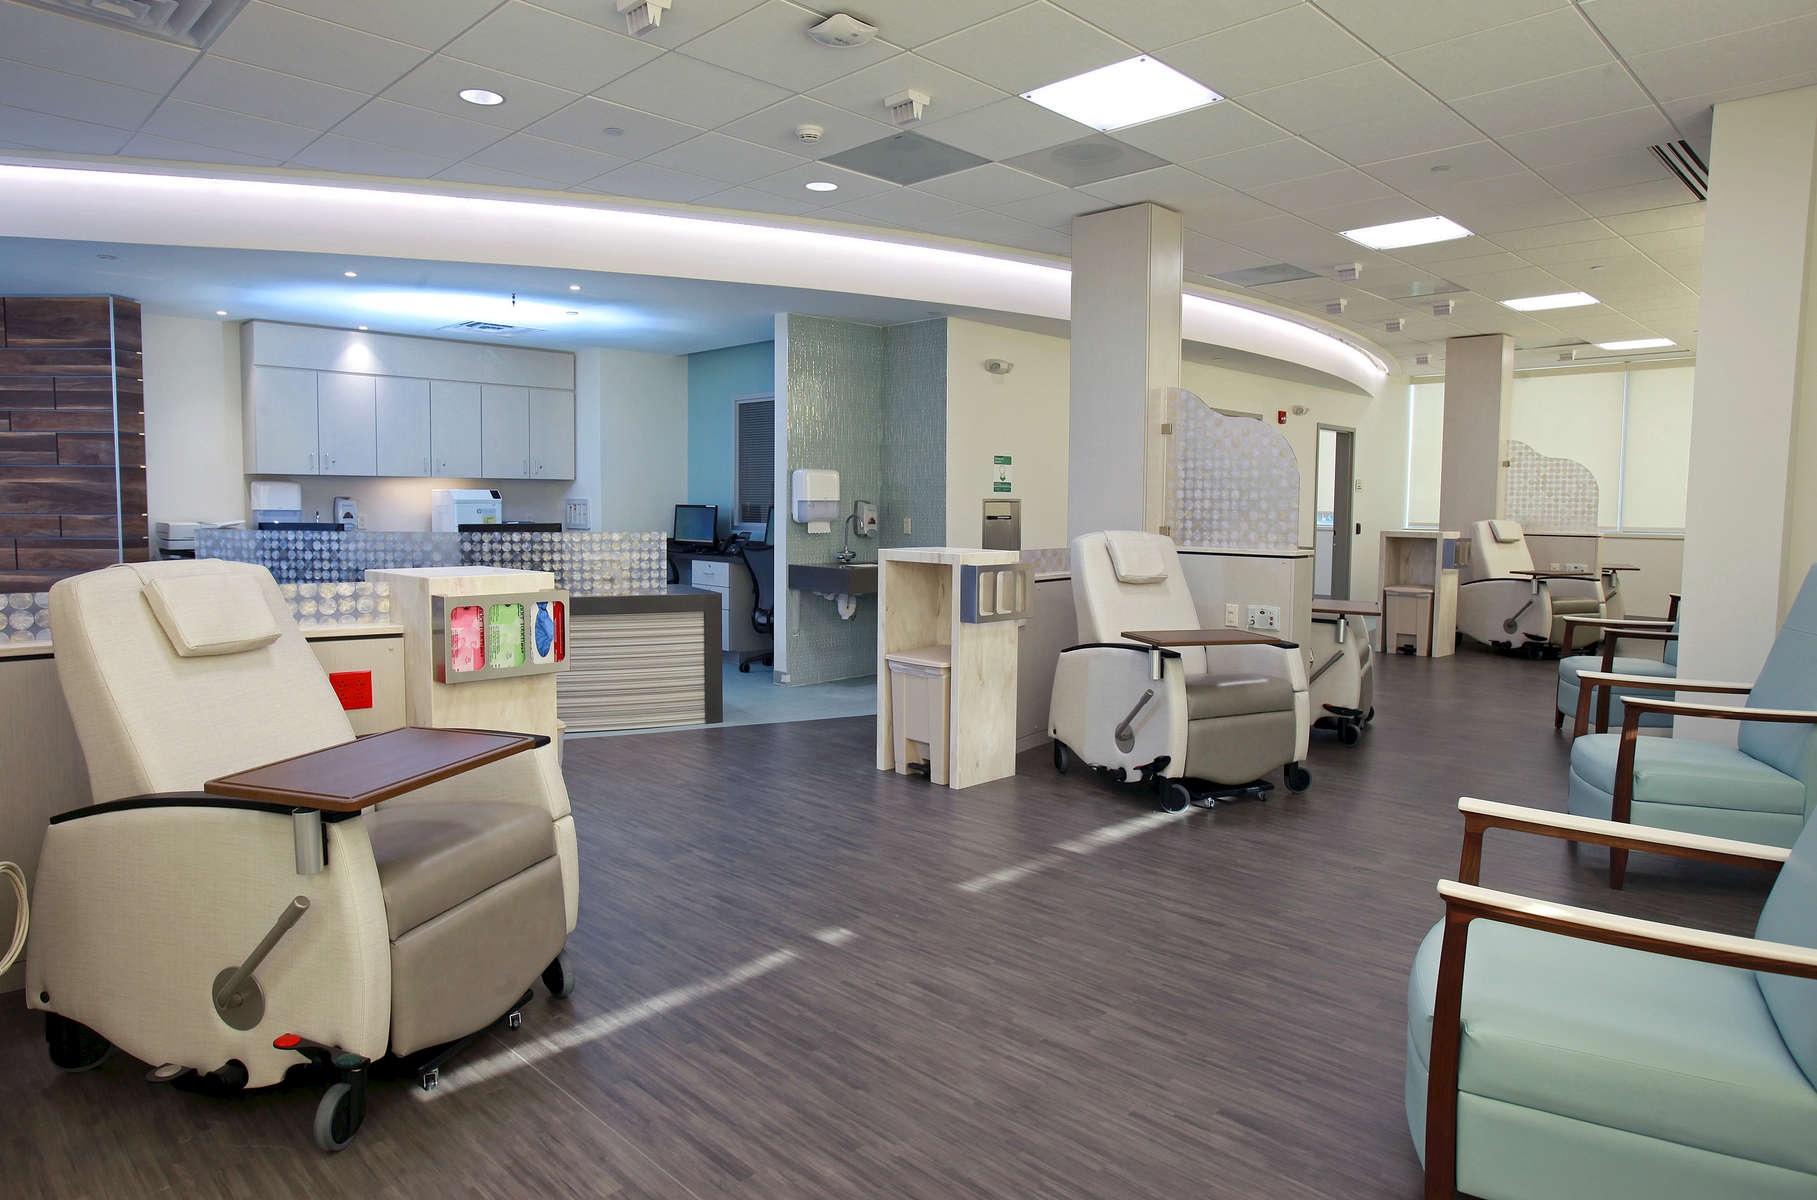 Infusion Room at Southern Ocean Medical Center in Manahawkin, New Jersey.  Photo By Bill Denver